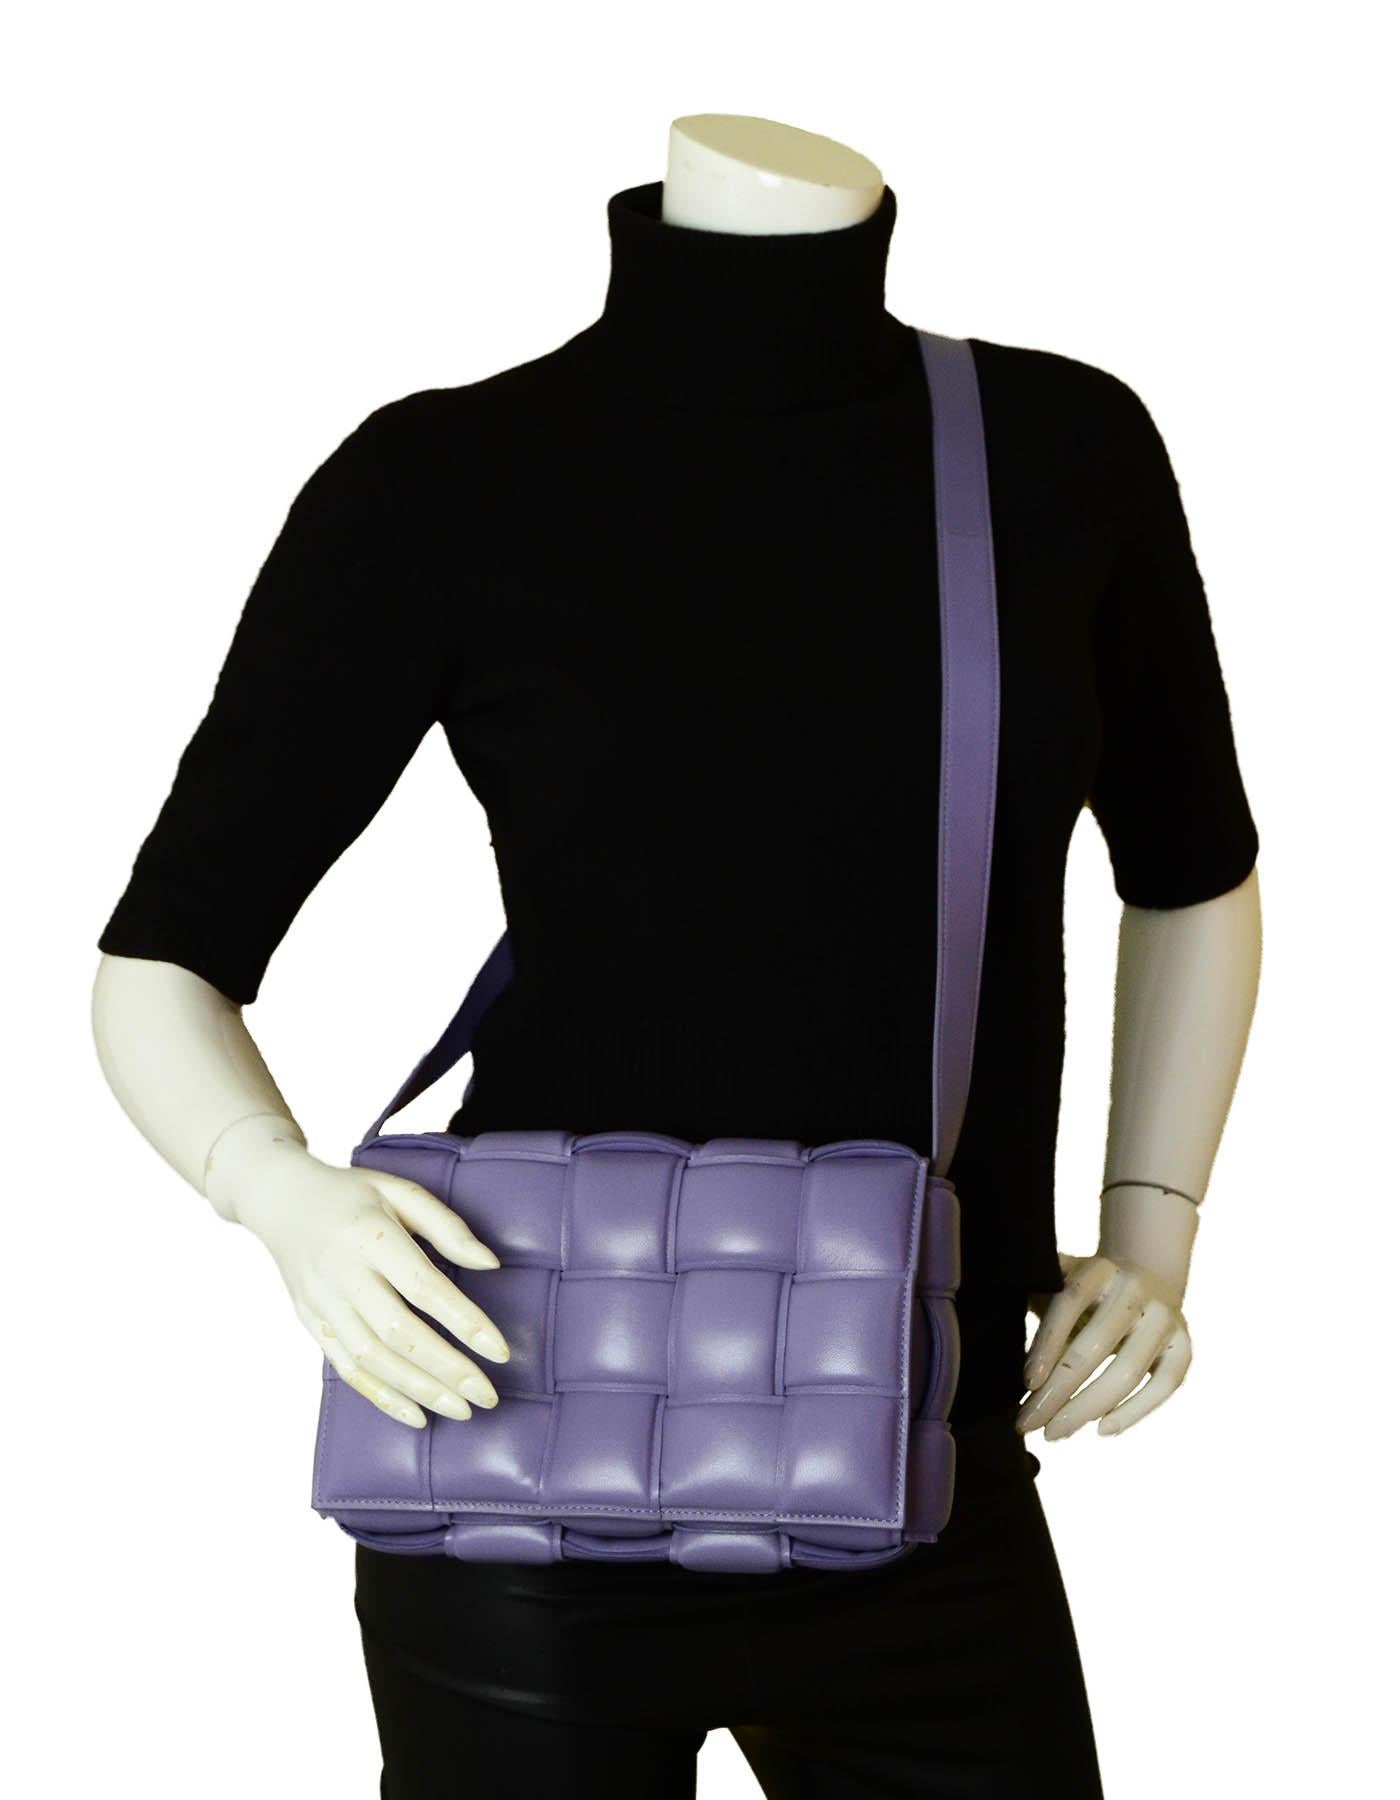 Bottega Veneta BV Lavender Maxi Intrecciato Leather Padded Cassette Crossbody Bag

Made In: Italy
Year of Production: 2020-2021
Color: Lavender
Hardware: Silvertone
Materials: Lambskin leather and metal
Lining: Leather
Closure/Opening: Flap top with